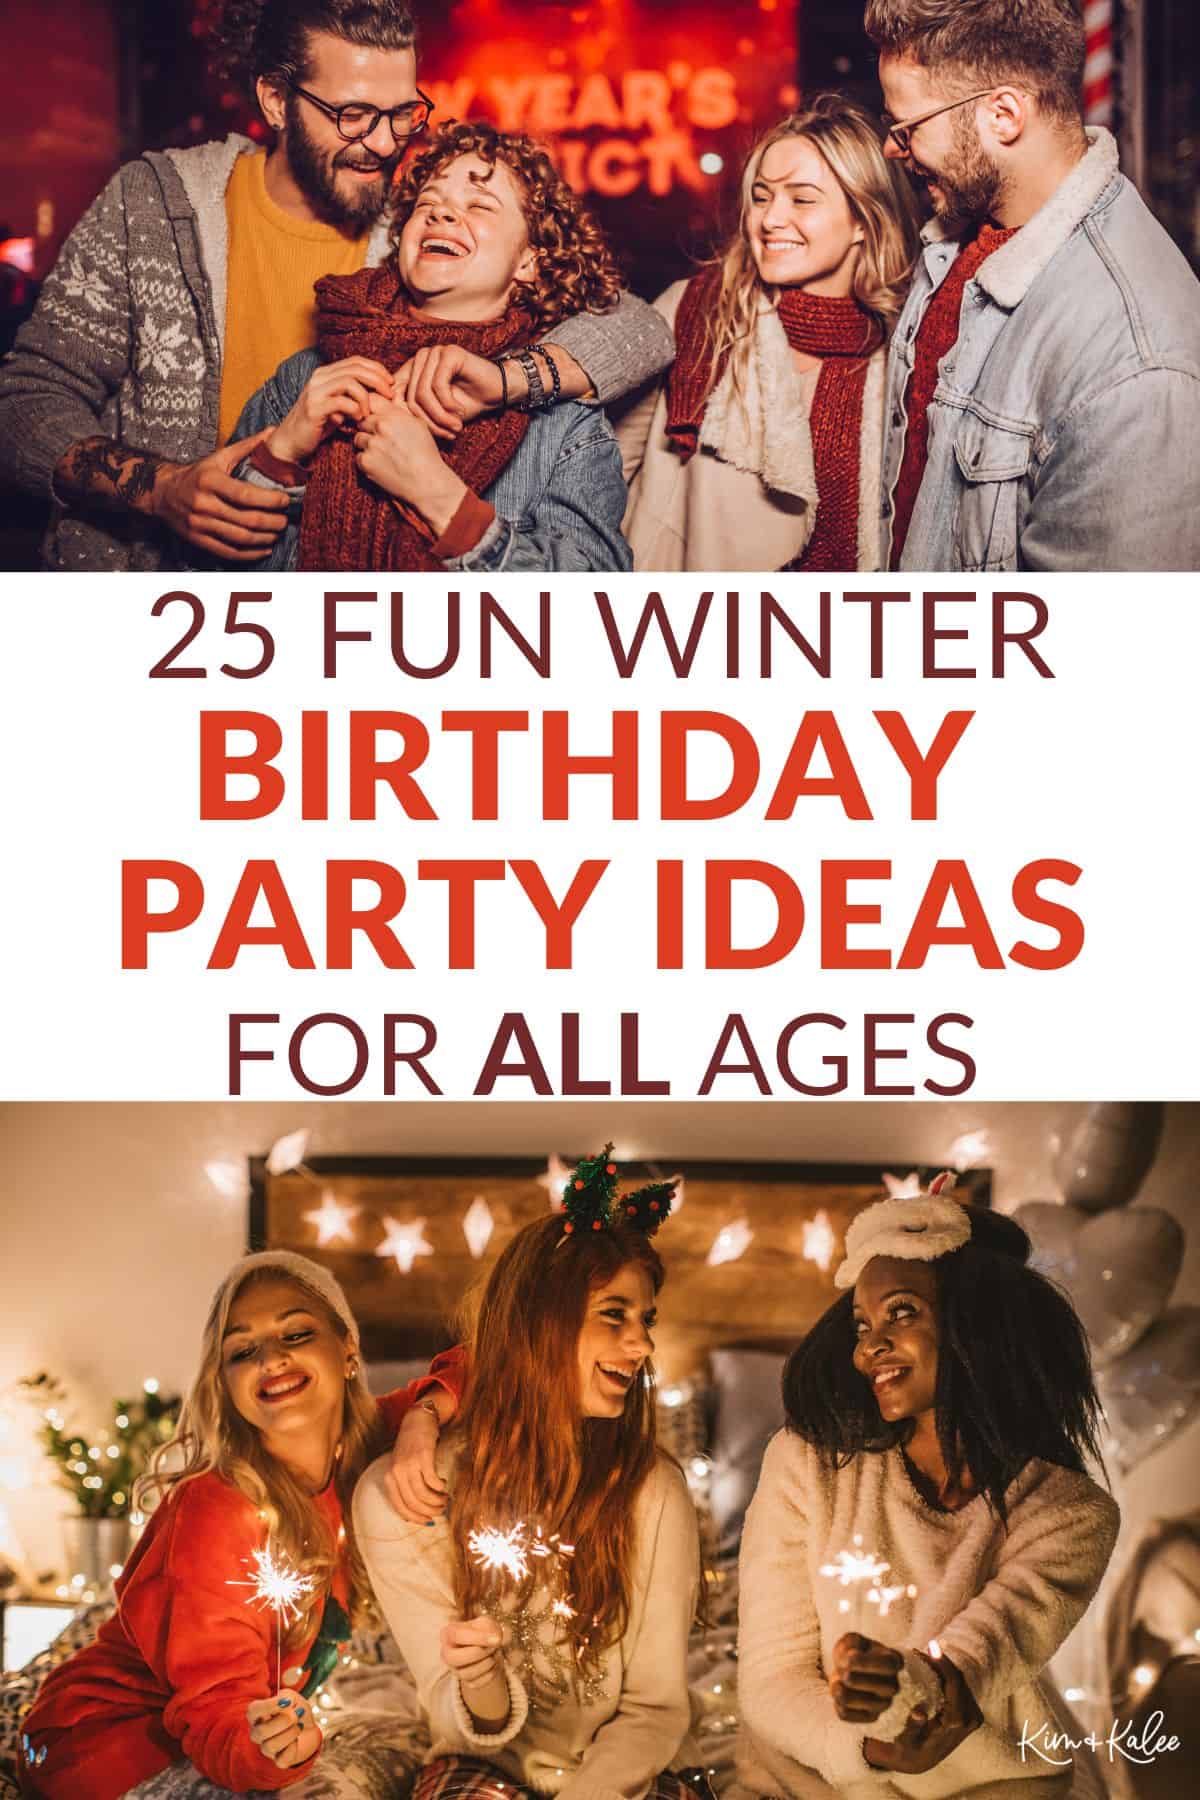 collage of 2 photos, one with 2 couples in warm clothes outside and one with 3 young women in pajamas holding sparklers - in the middle text overlay says 25 fun Winter birthday party ideas for all ages